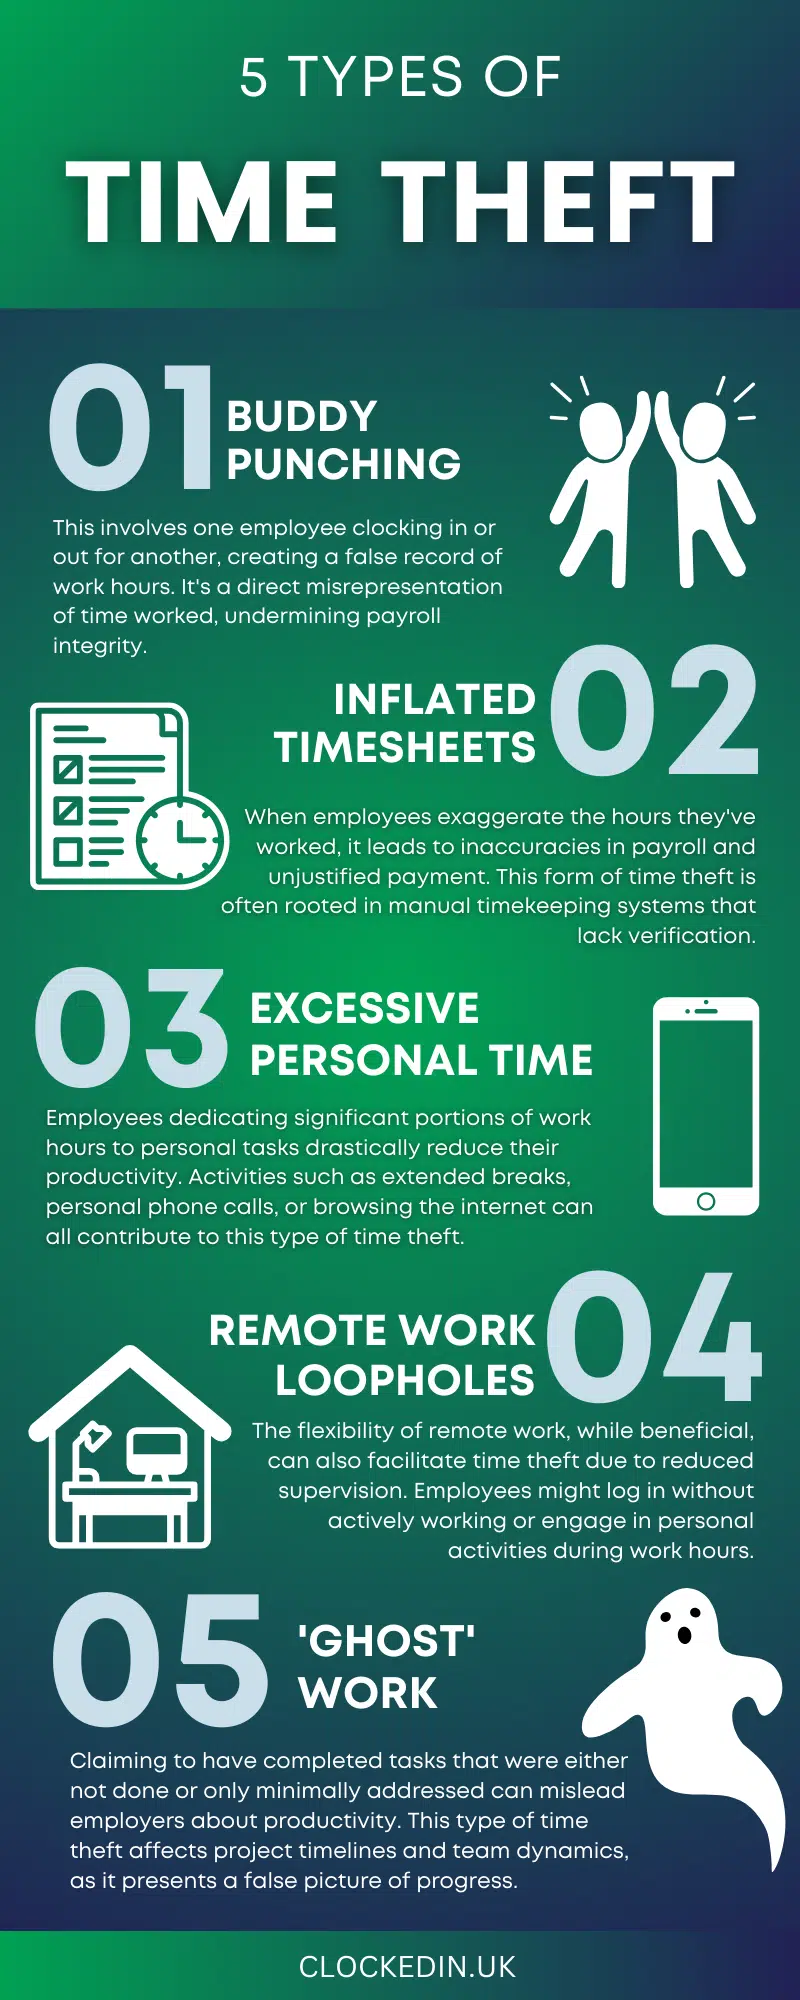 5 Types of Time Theft